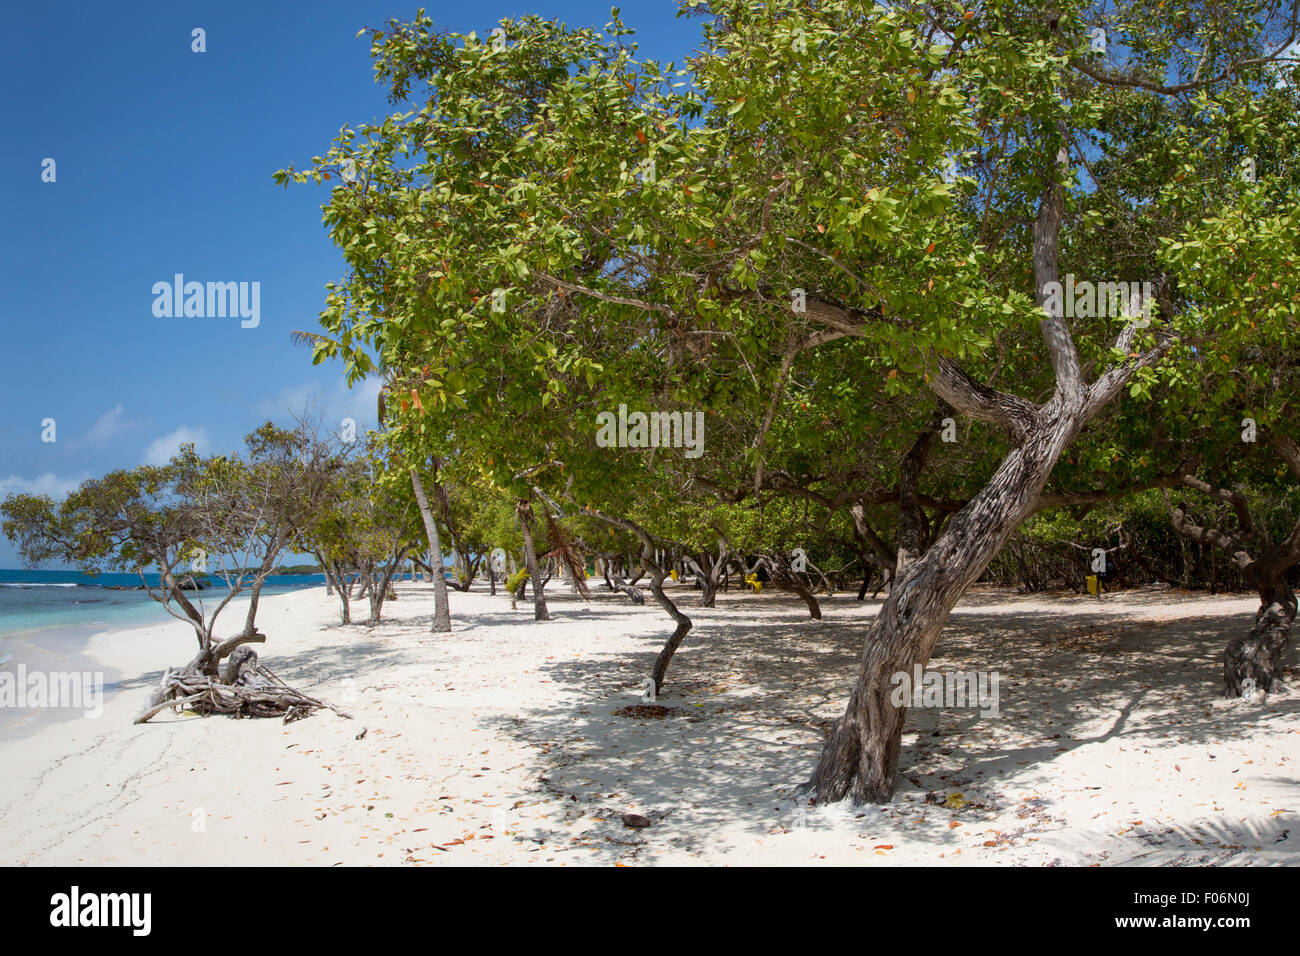 Morrocoy National park, a paradise with coconut trees, white sand and deep blue sky in Venezuela Stock Photo